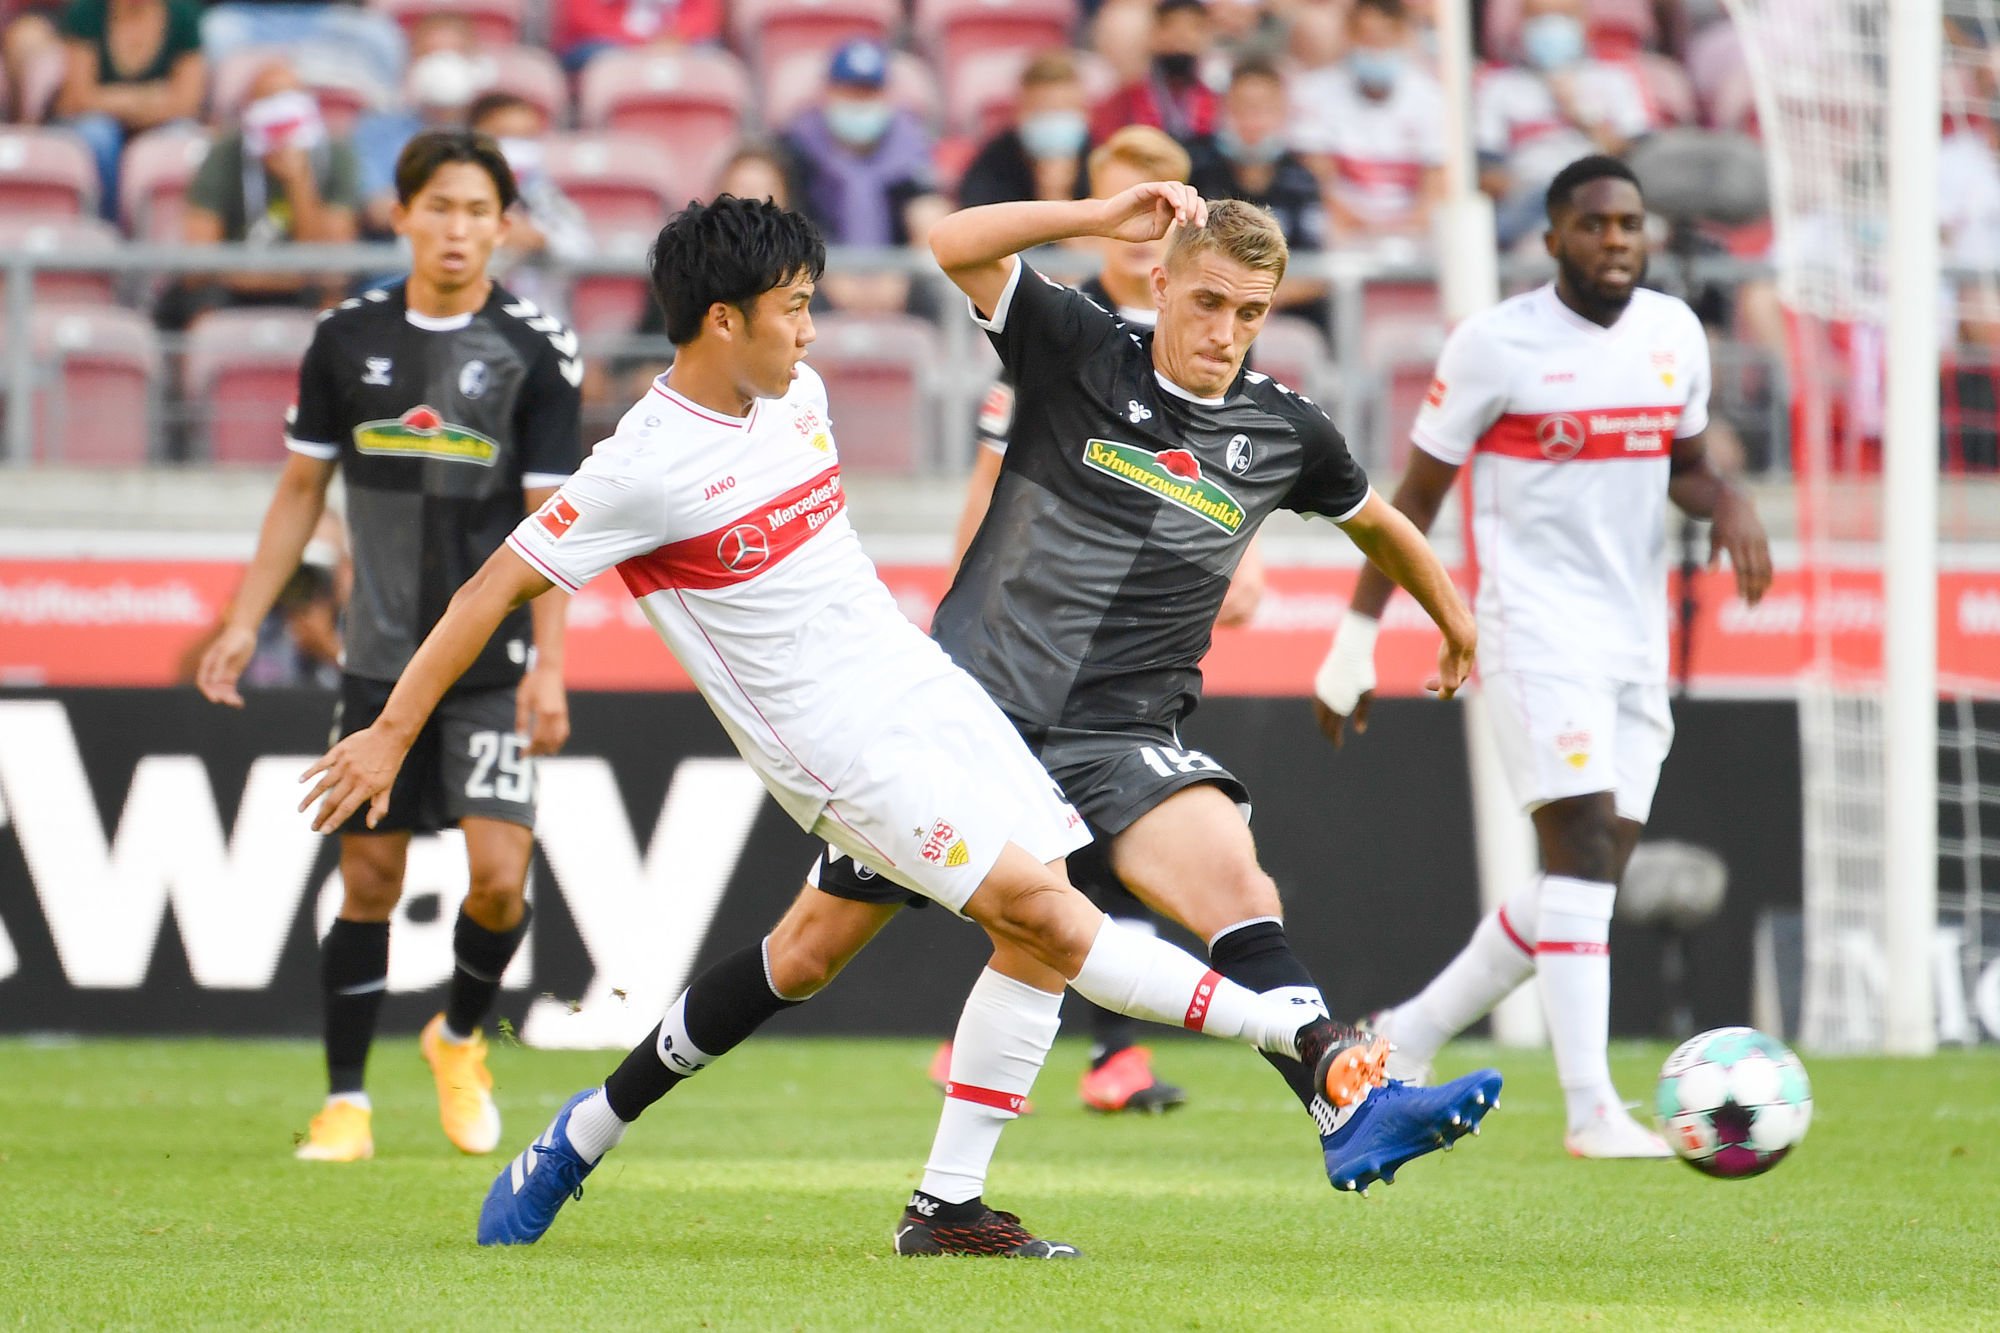 NO SALES IN JAPAN! Wataru ENDO (VFB Stuttgart), action, duels versus Nils PETERSEN (SC Freiburg), football 1st Bundesliga season 2020 / 2021,1.matchday, matchday01, VFB Stuttgart (S) - SC Freiburg (FR) 2-3, on 19.09 .2020 in Munich MERCEDES BENZ ARENA, DFL REGULATIONS PROHIBIT ANY USE OF PHOTOGRAPHS AS IMAGE SEQUENCES AND / OR QUASI-VIDEO.EDITORIAL USE ONLY. | usage worldwide 
By Icon Sport - Nils PETERSEN - Wataru ENDO - Mercedes-Benz Arena - Stuttgart (Allemagne)